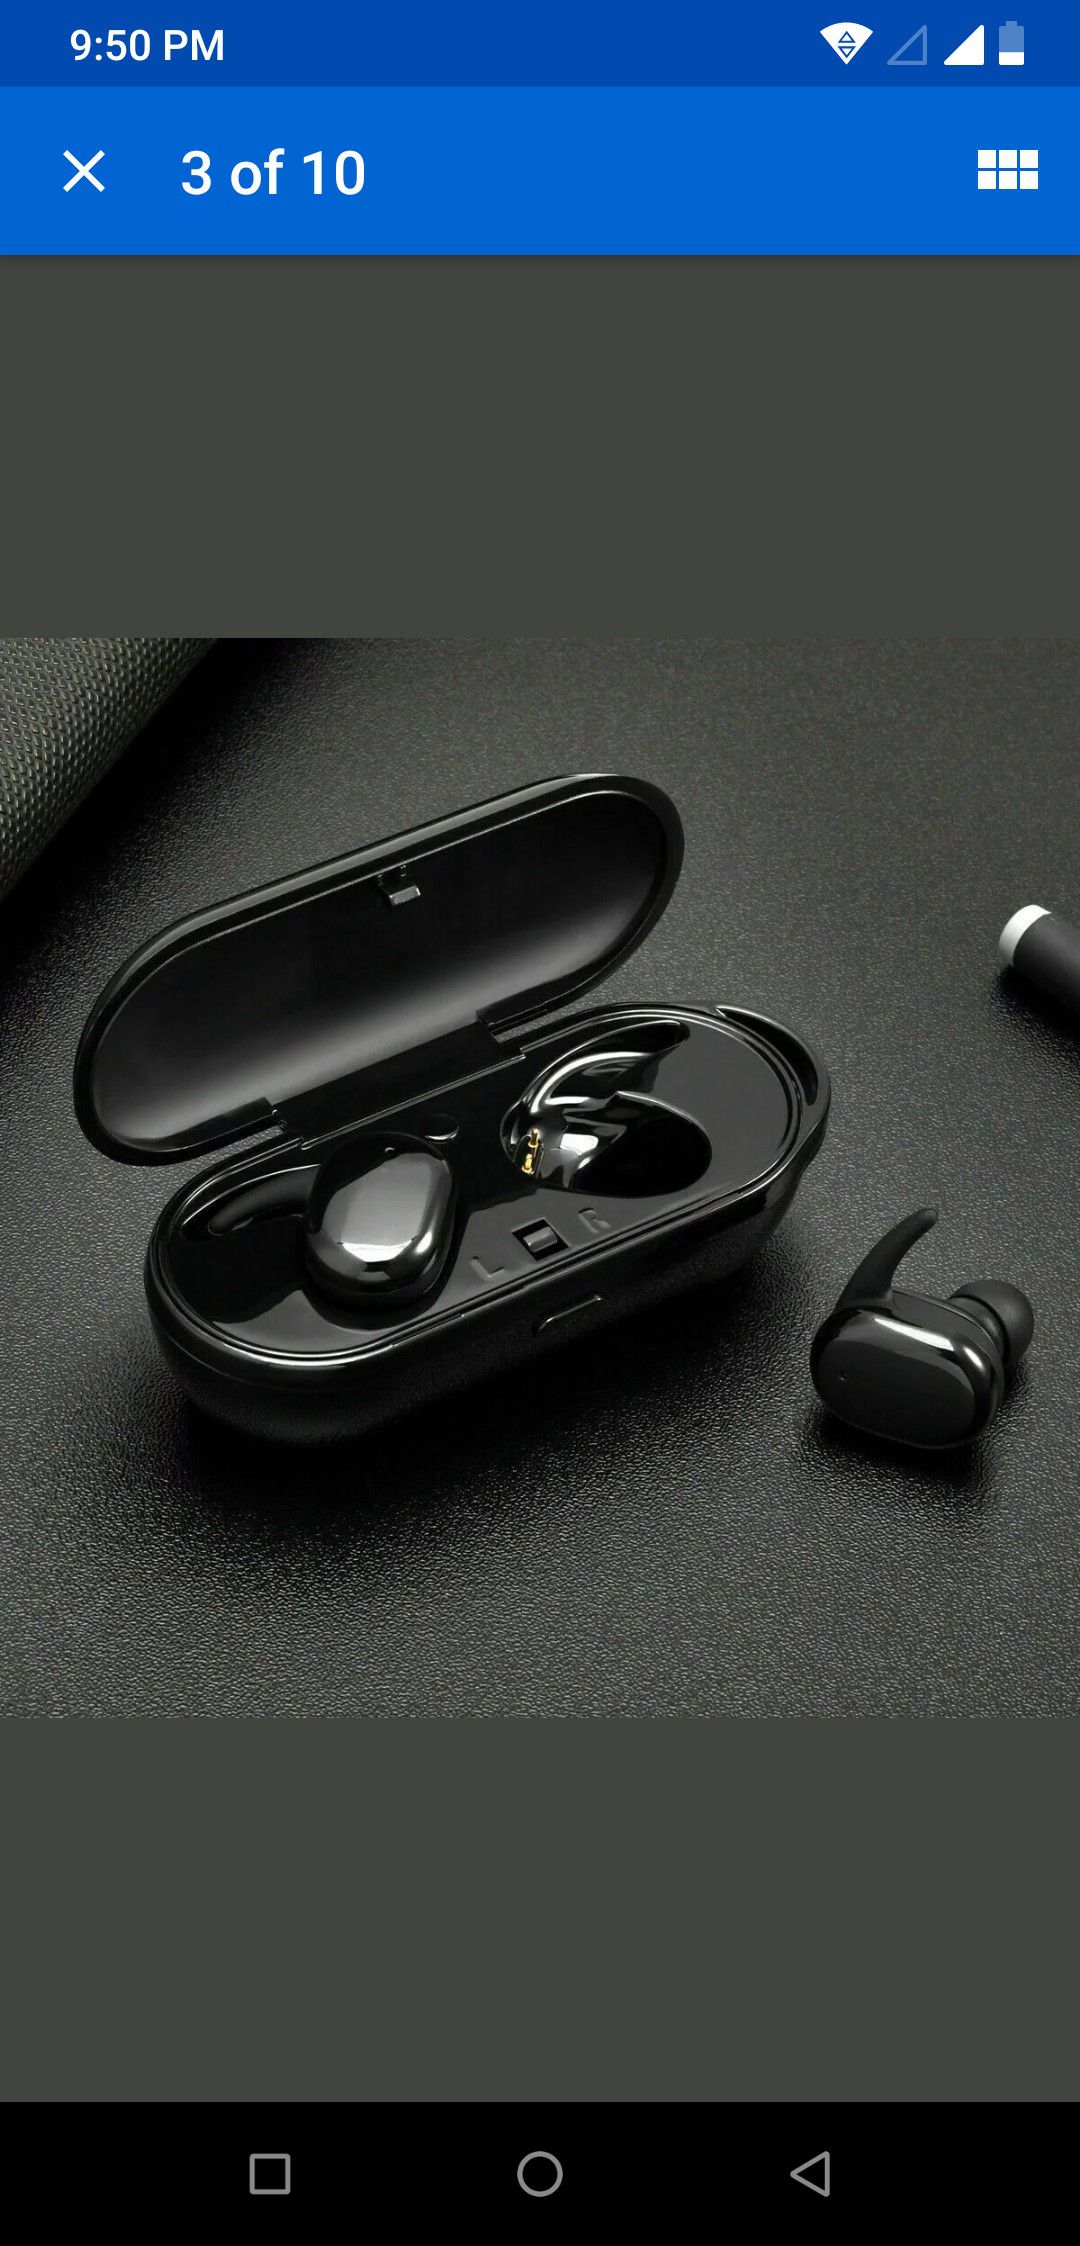 Brand new airpods true stereo Wireless Bluetooth 5.0 earphone earbuds headset latest touch control with FREE i7 TWS or 32gb Sandisk USB (Your choice)